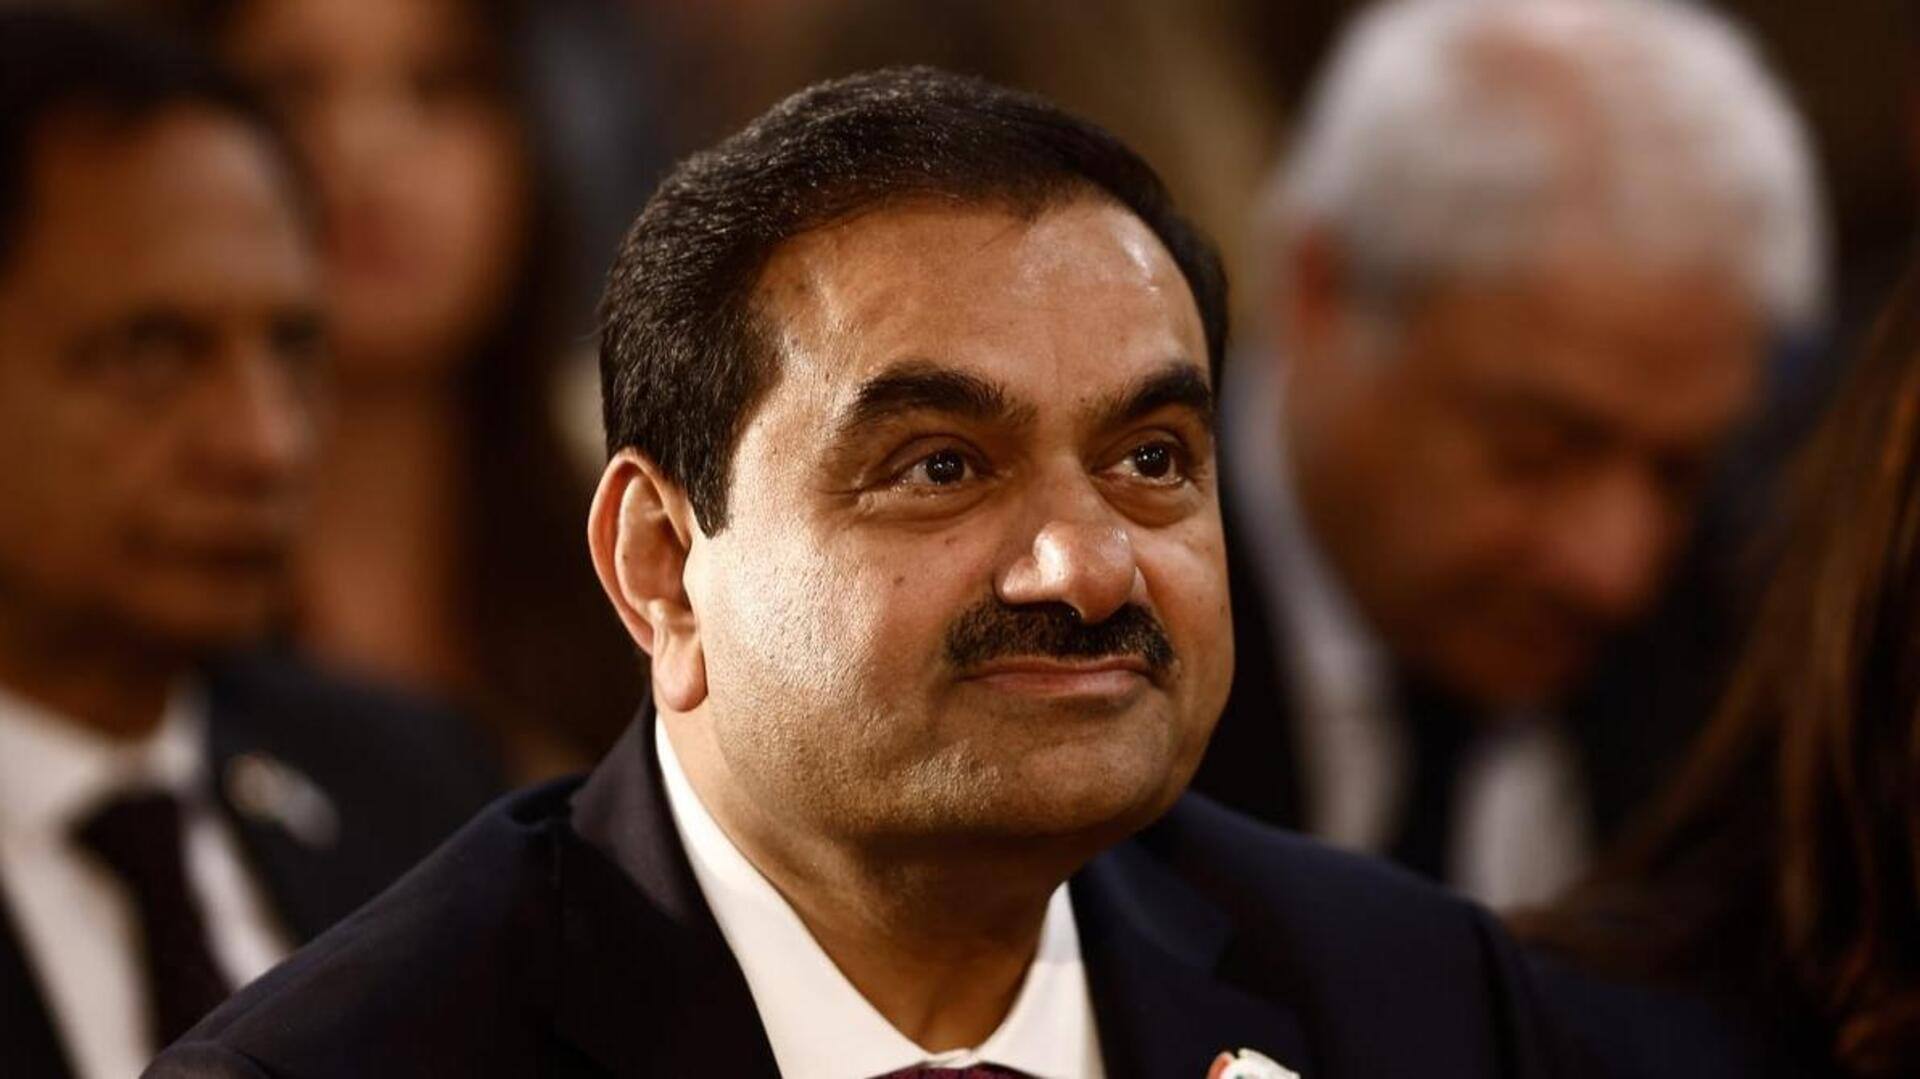 Gautam Adani's fortune grows by $5.6B in just 6 days